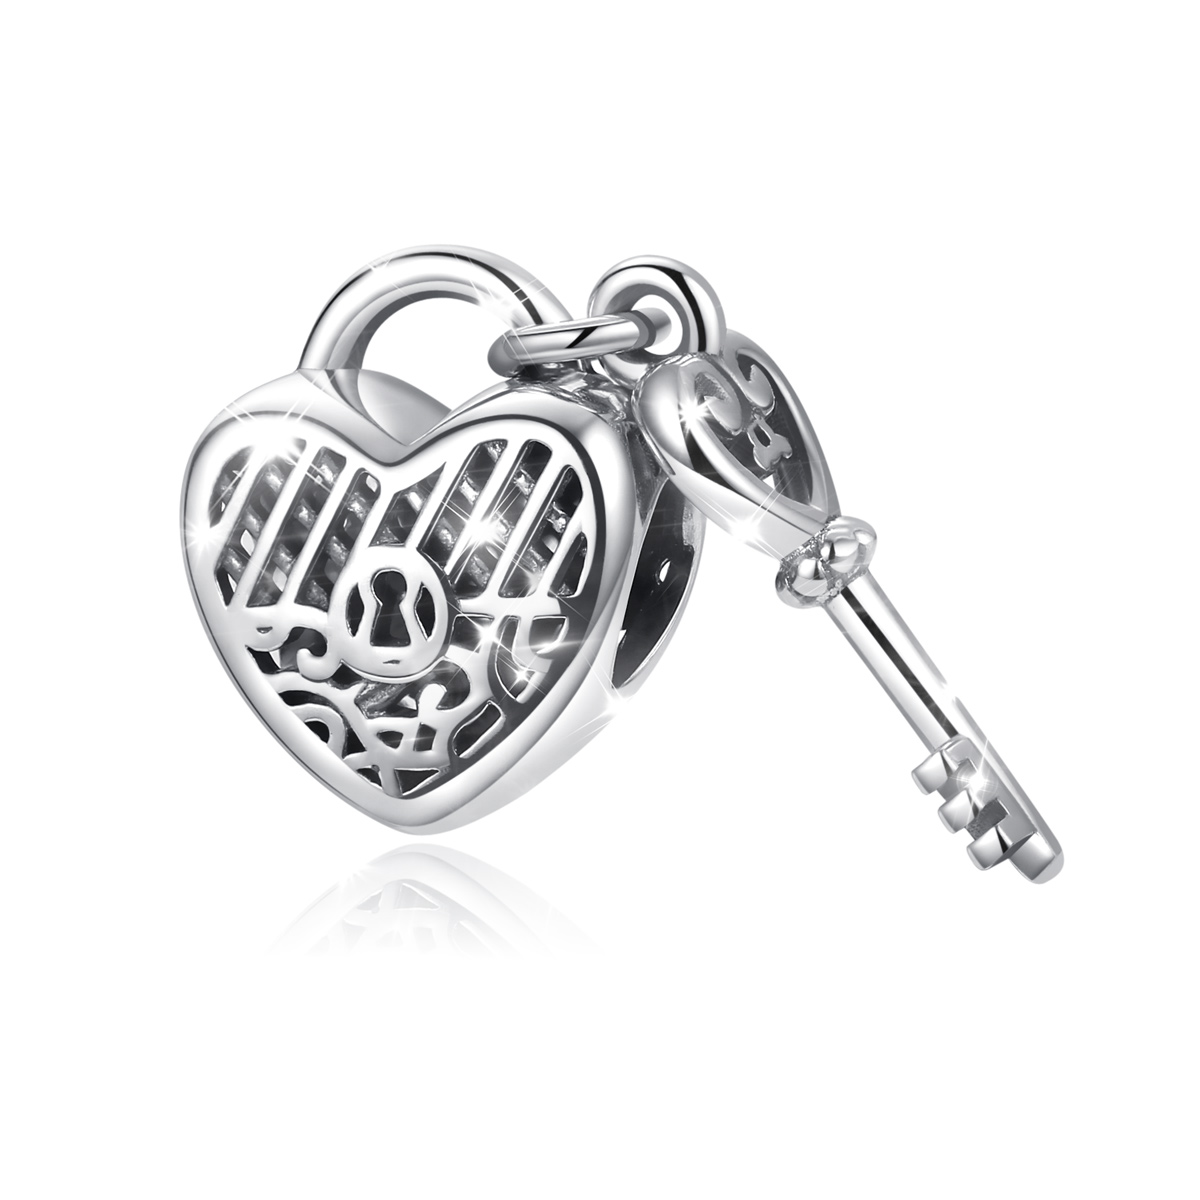 Merryshine Jewelry Exquisite 925 Sterling Silver Heart Lock Bead Pendant with Key Charm